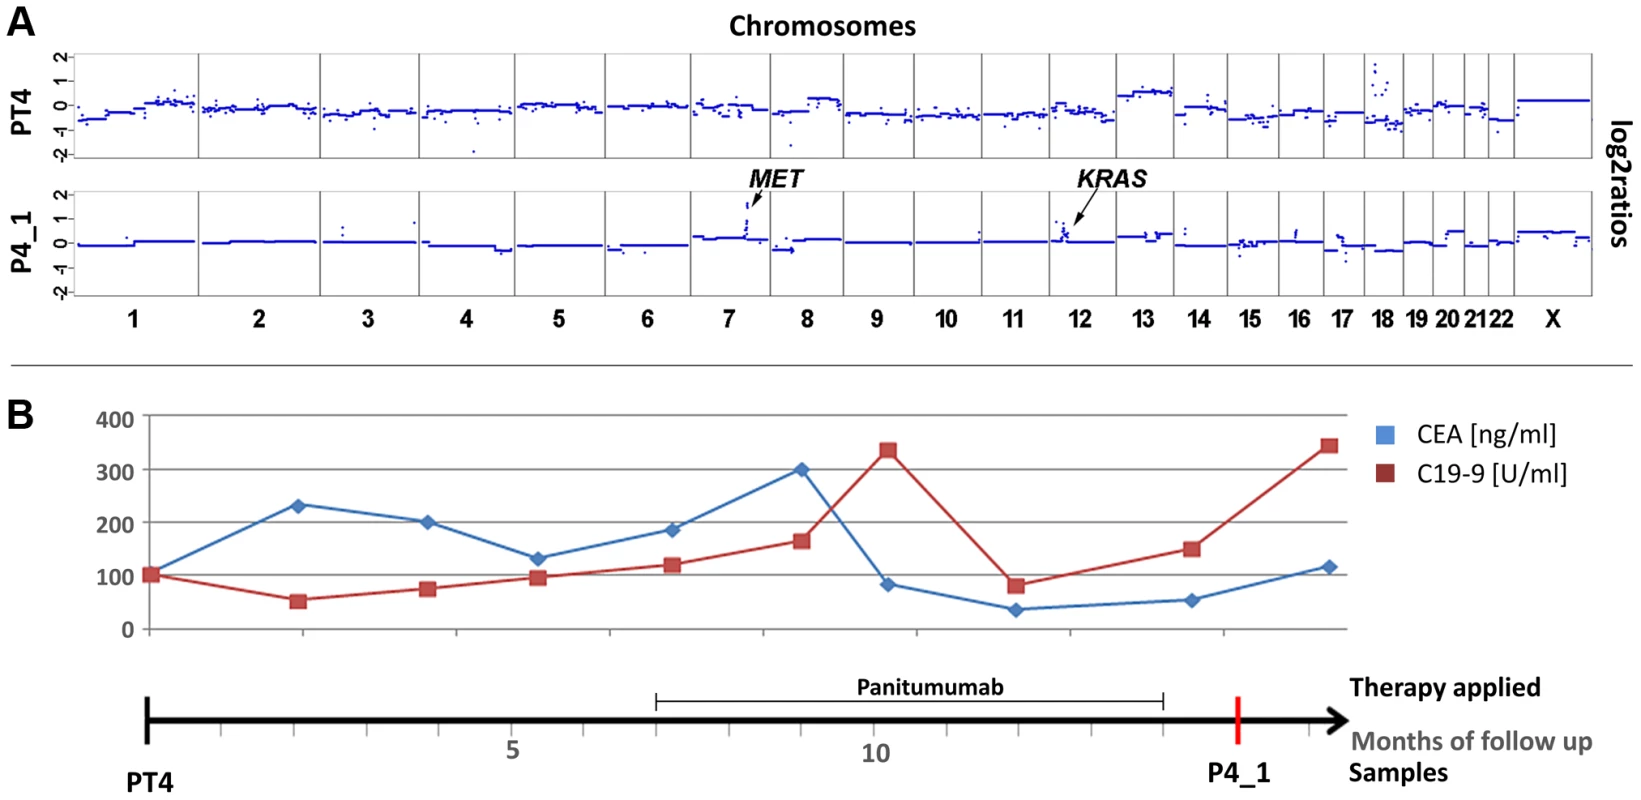 Co-occurrence of amplifications of the <i>KRAS</i> and <i>MET</i> genes observed after 7 months of treatment with panitumumab in patient #4.